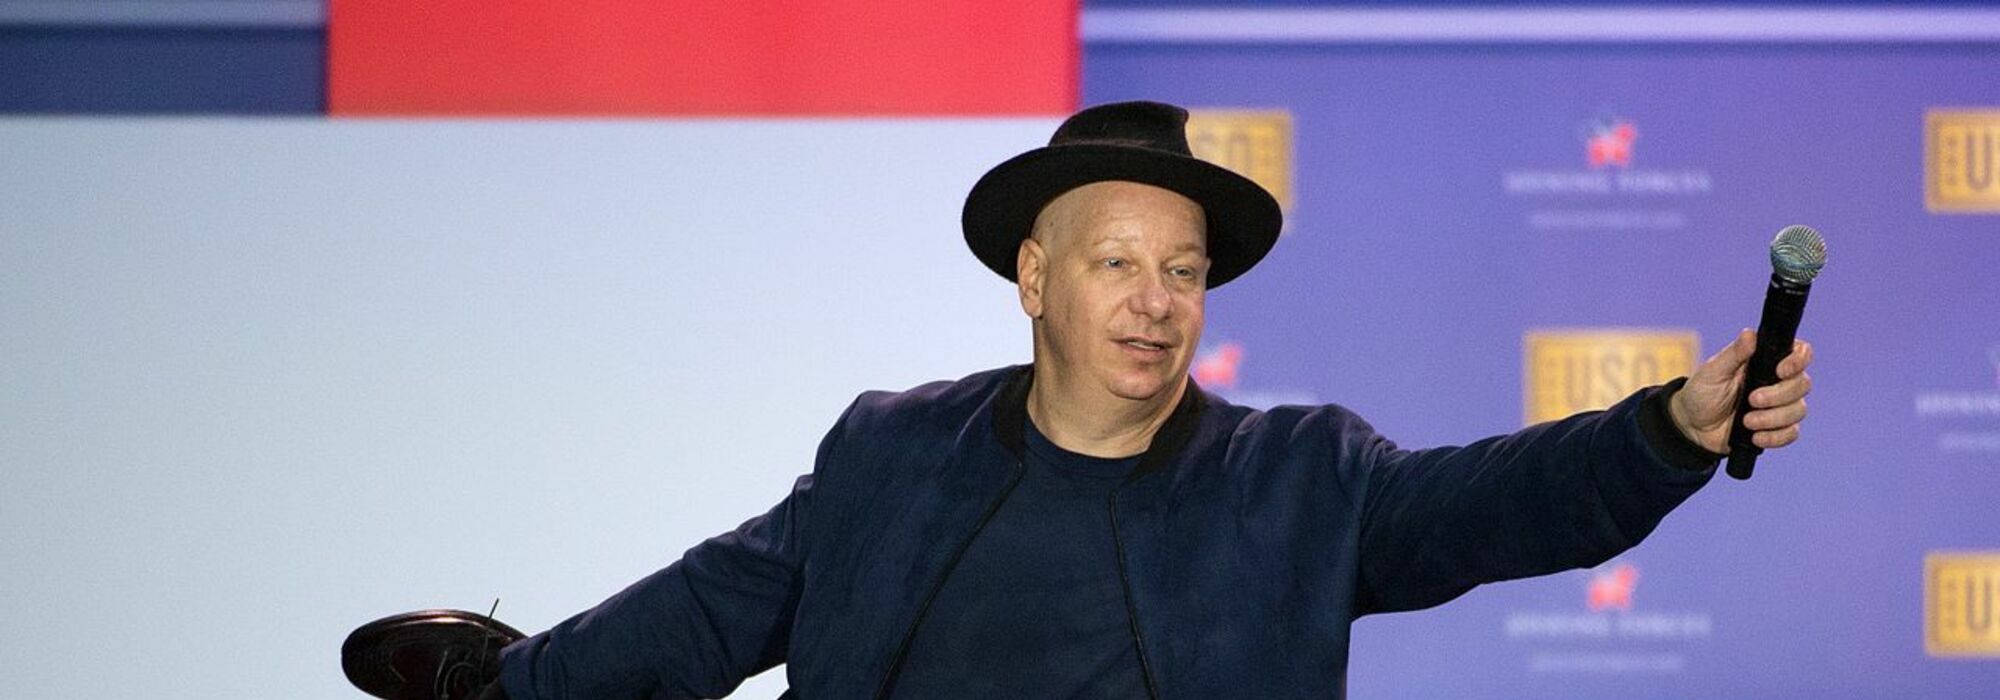 A Jeff Ross live event